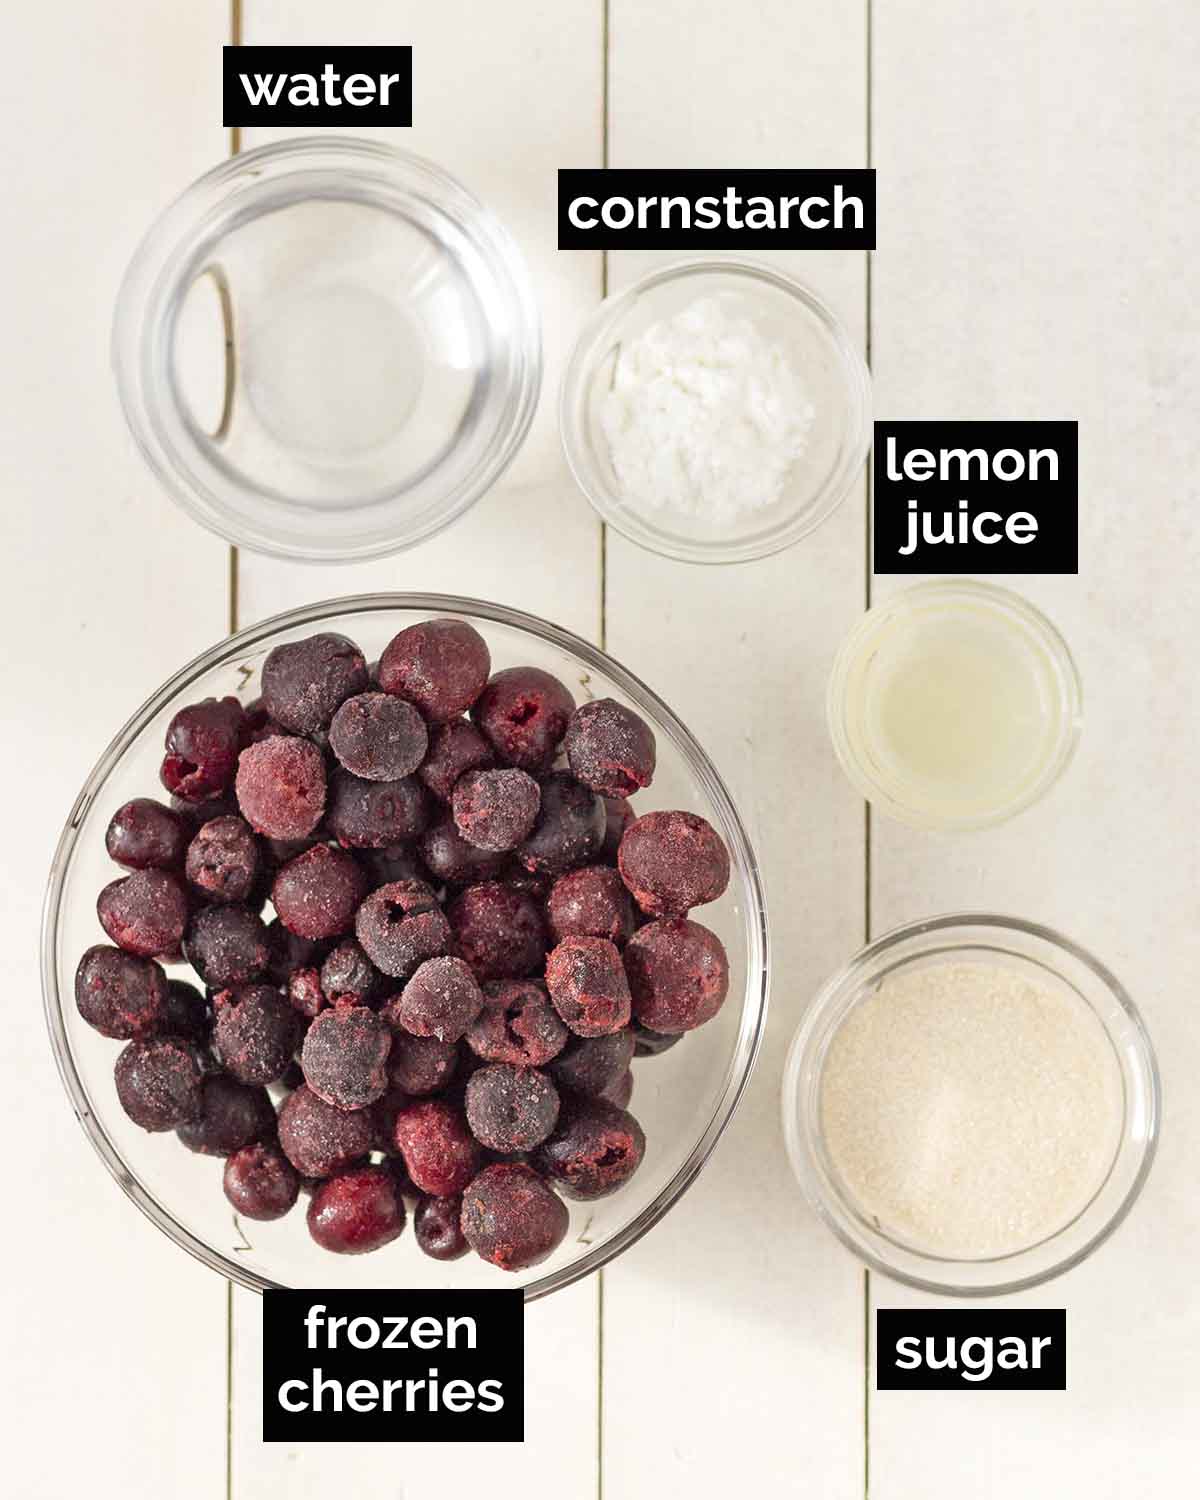 An overhead shot showing the ingredients needed to make cherry sauce.